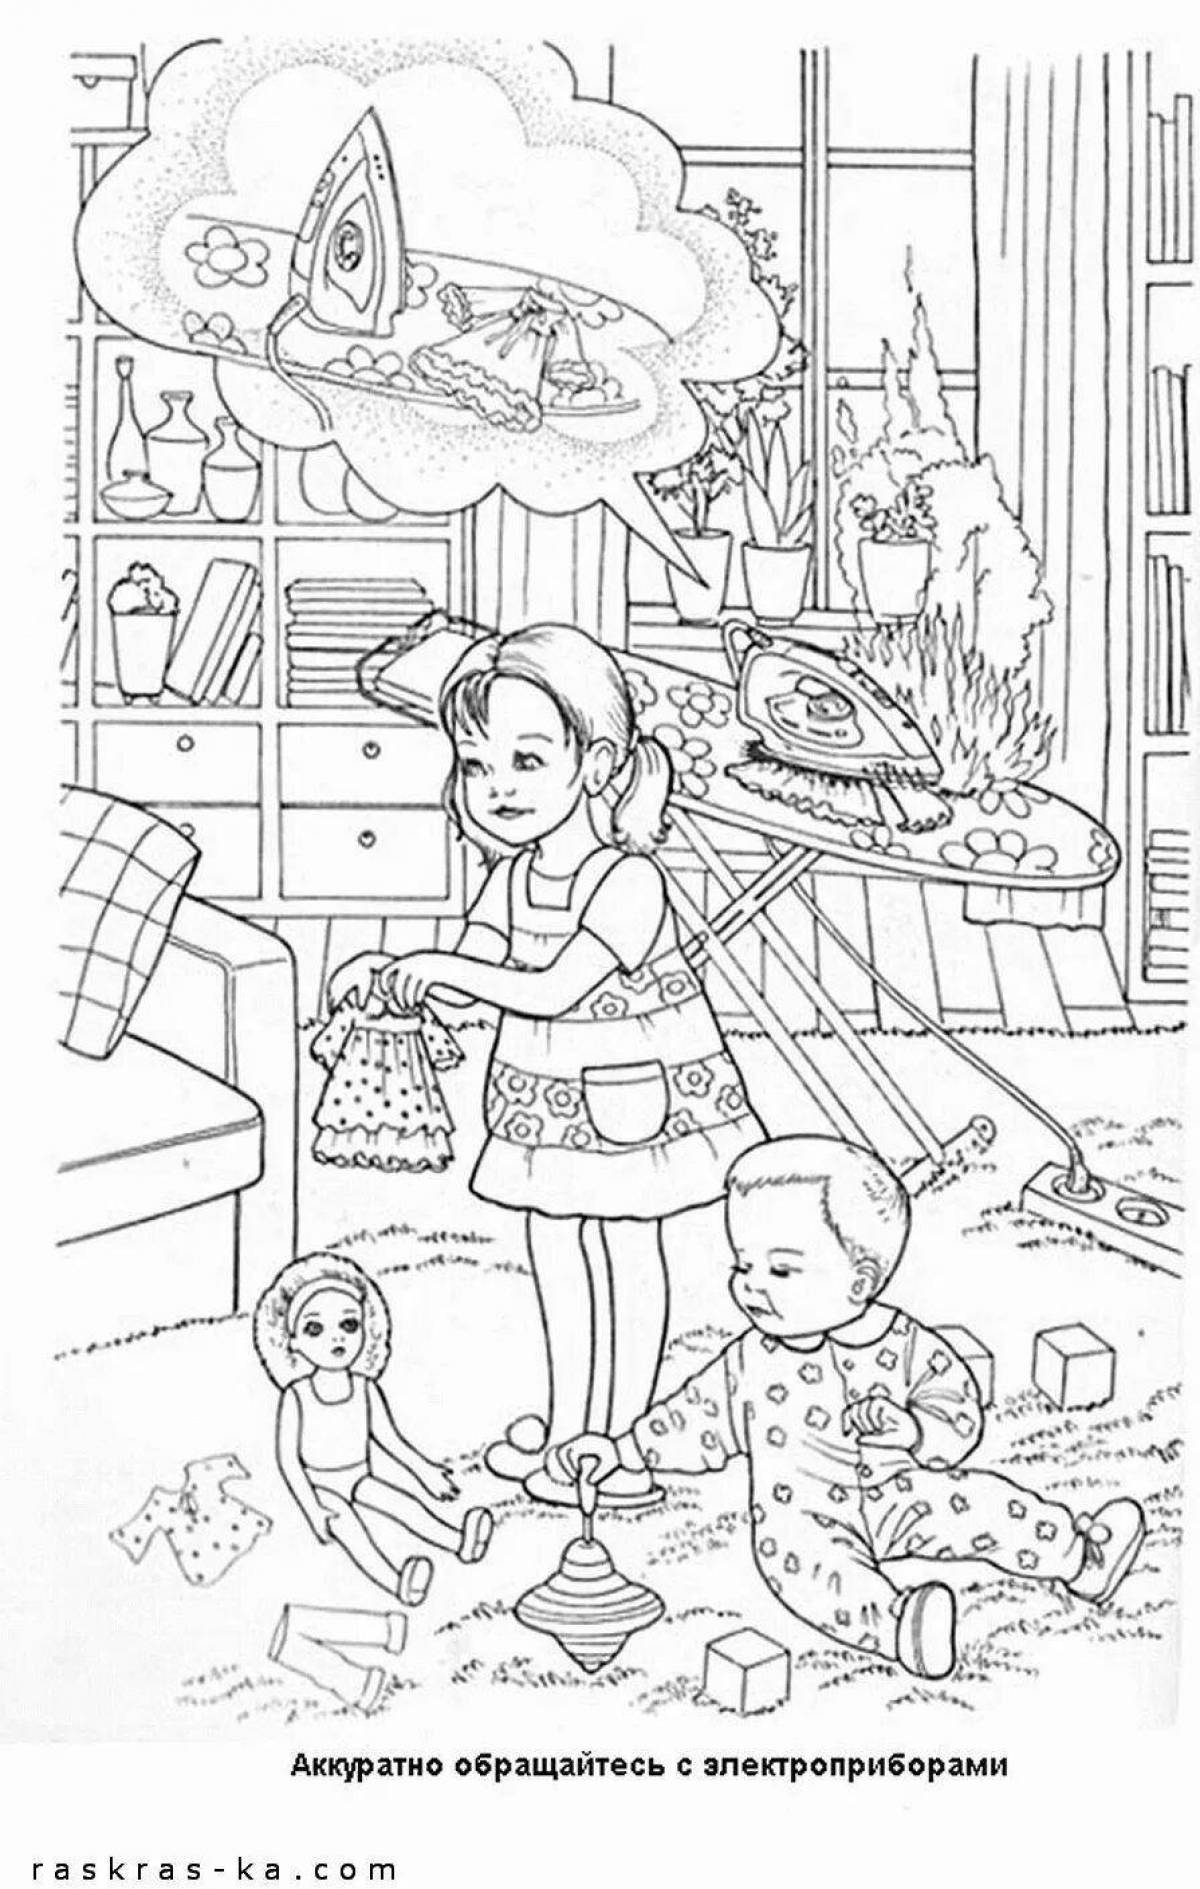 Funny fire safety coloring book for kindergarten